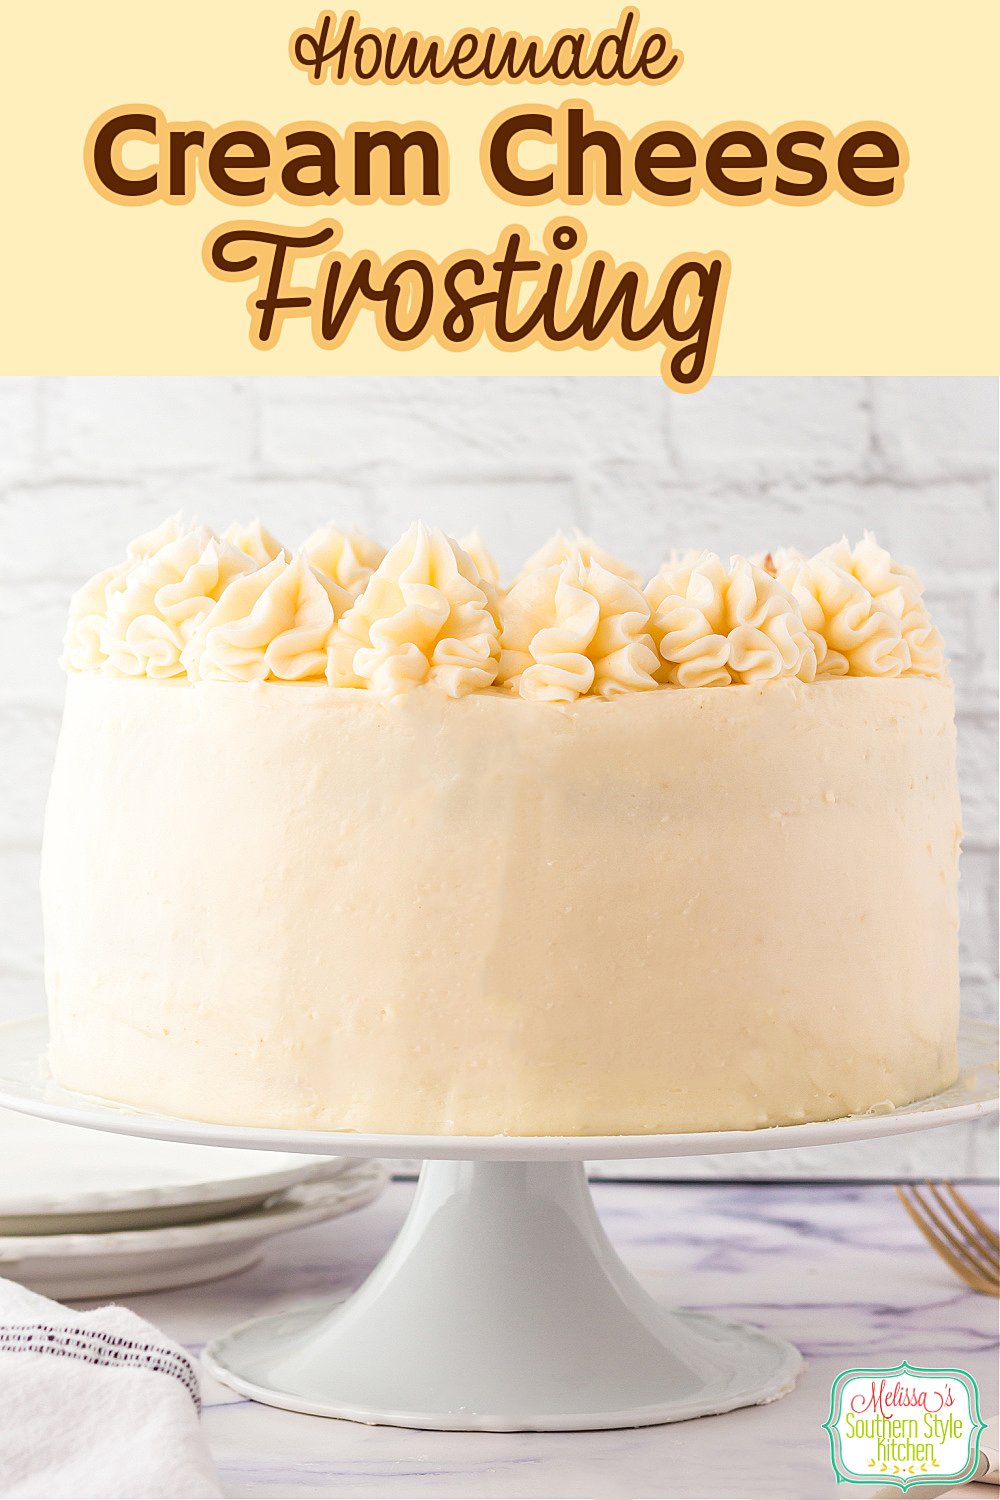 This homemade Cream Cheese Frosting recipe can be used for frosting cupcakes, sheet cakes or layer cakes in any flavor. #creamcheeseicing #homemadefrostings #frostingrecipes #cakeicingrecipes #cakes #cupcakes #creamcheesefrosting